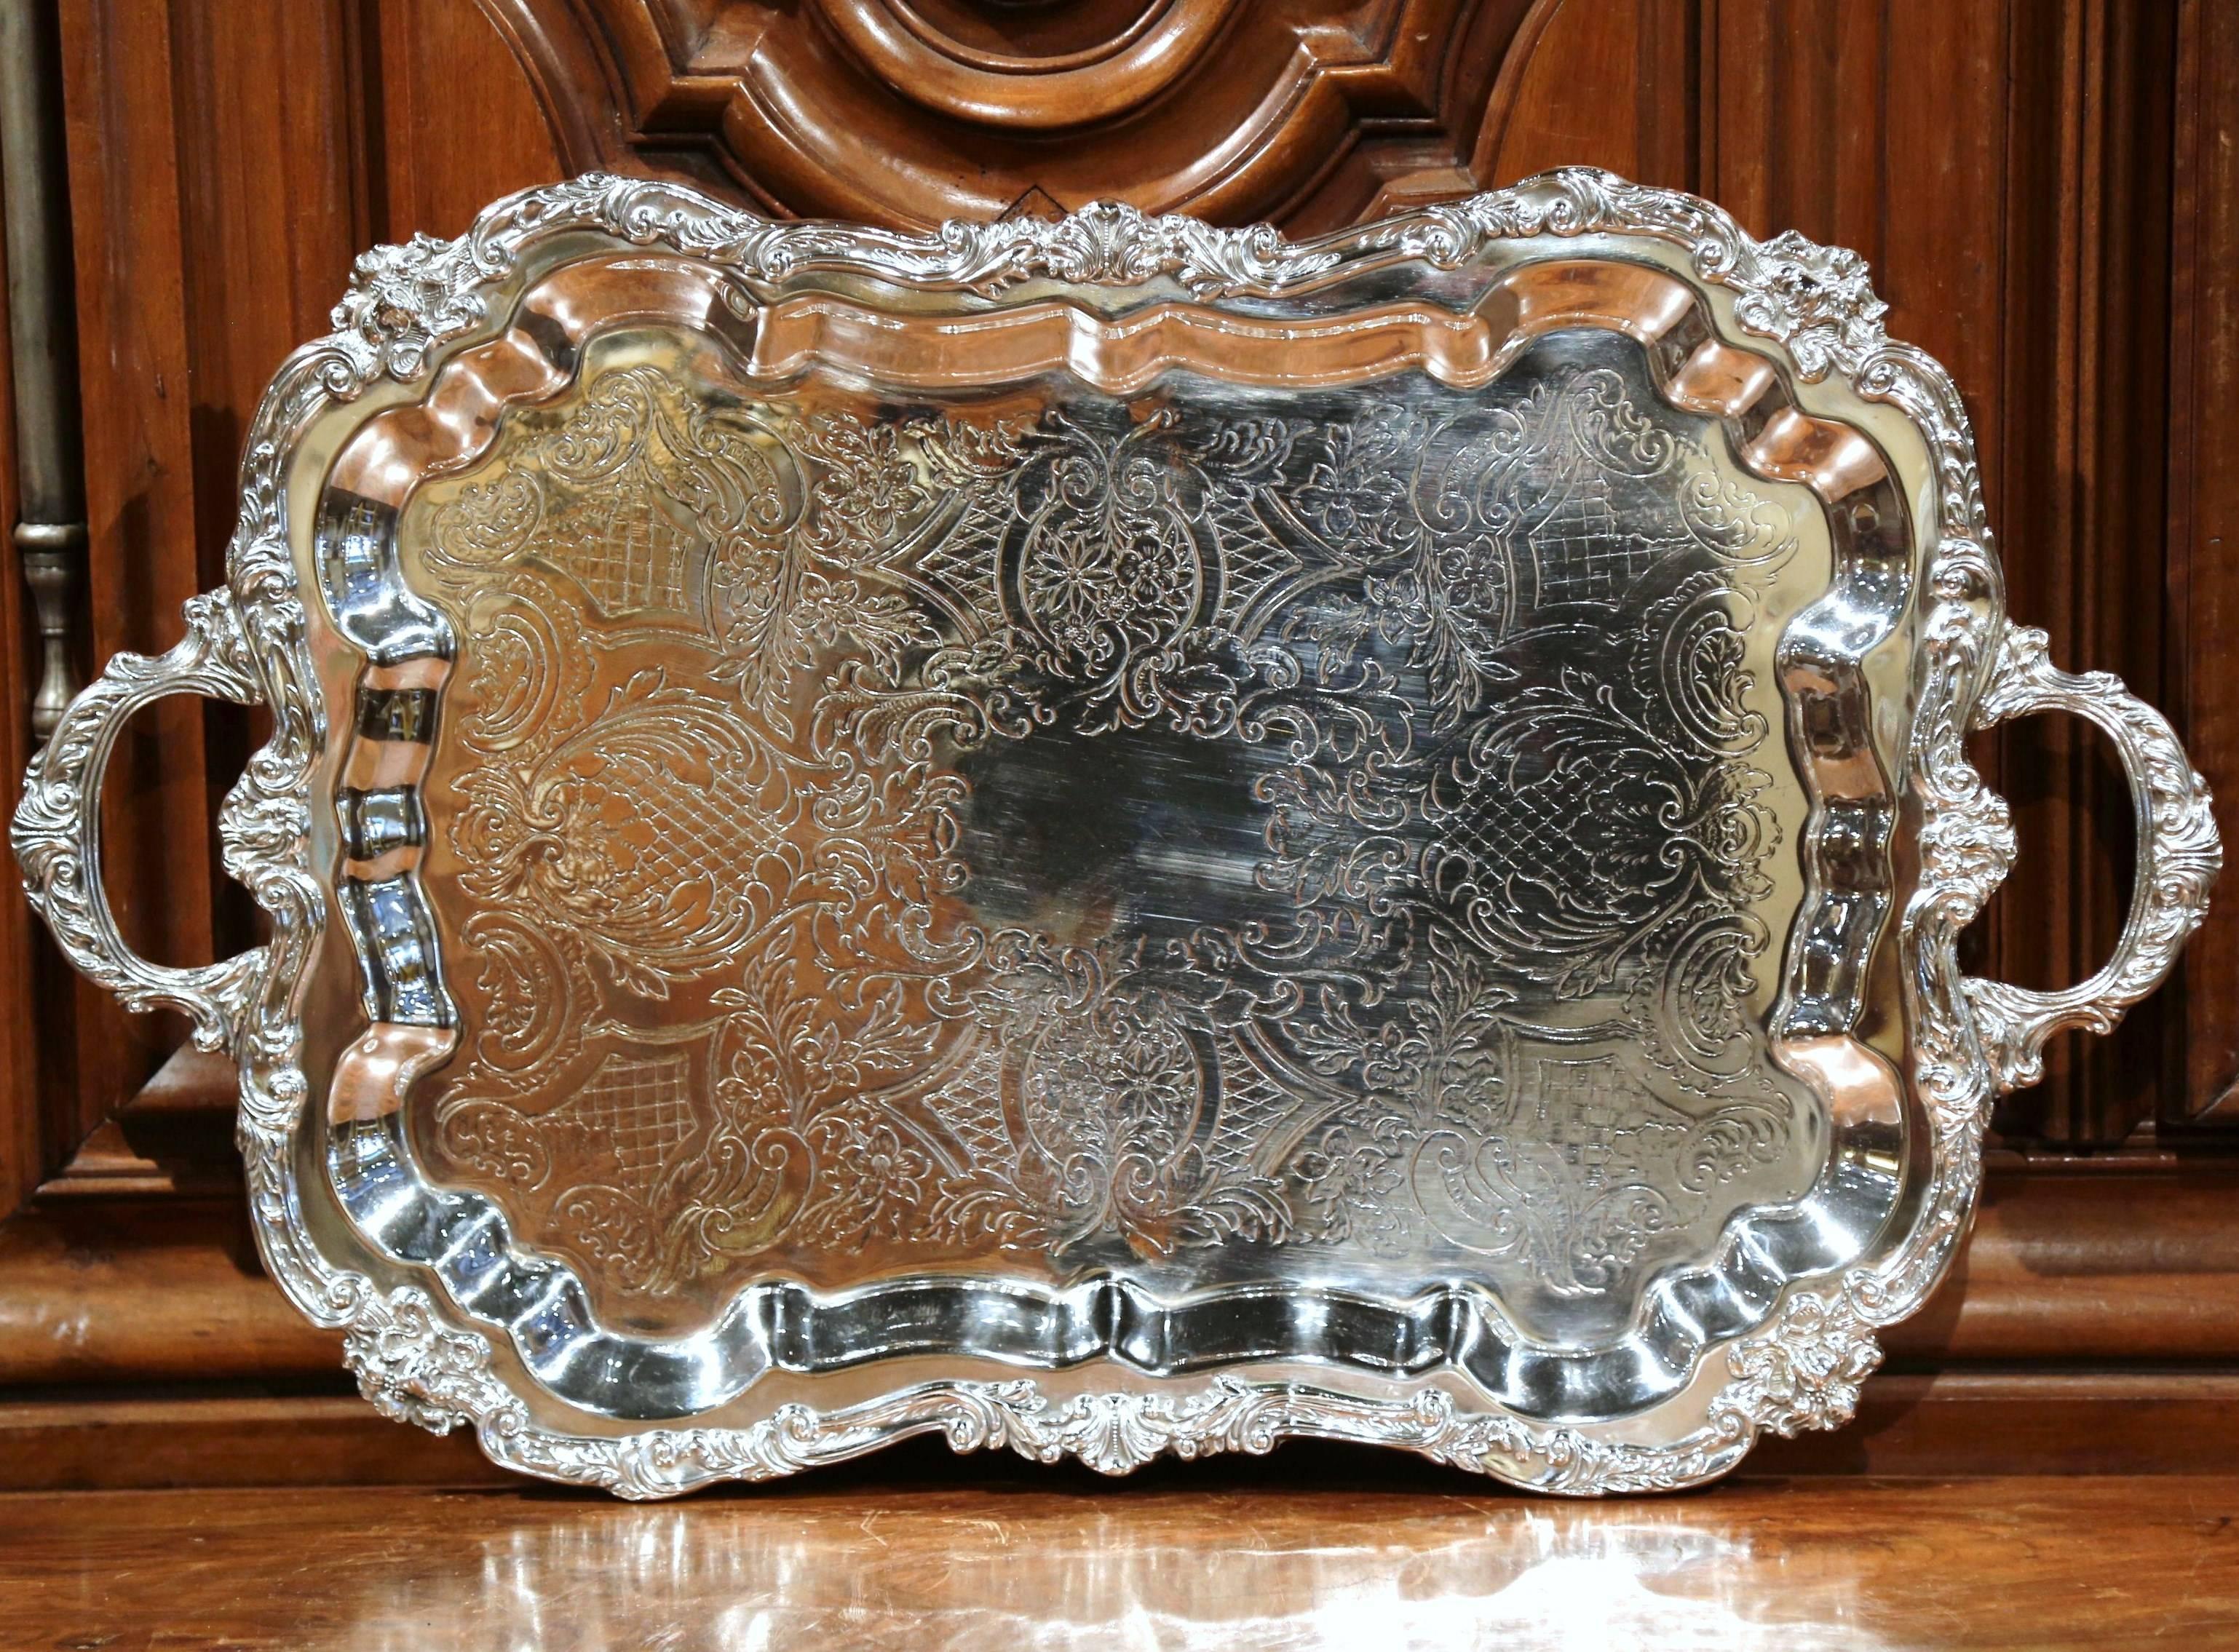 Early 20th Century French Silver Plated Tray with Ornate Scrolls and Engravings 1